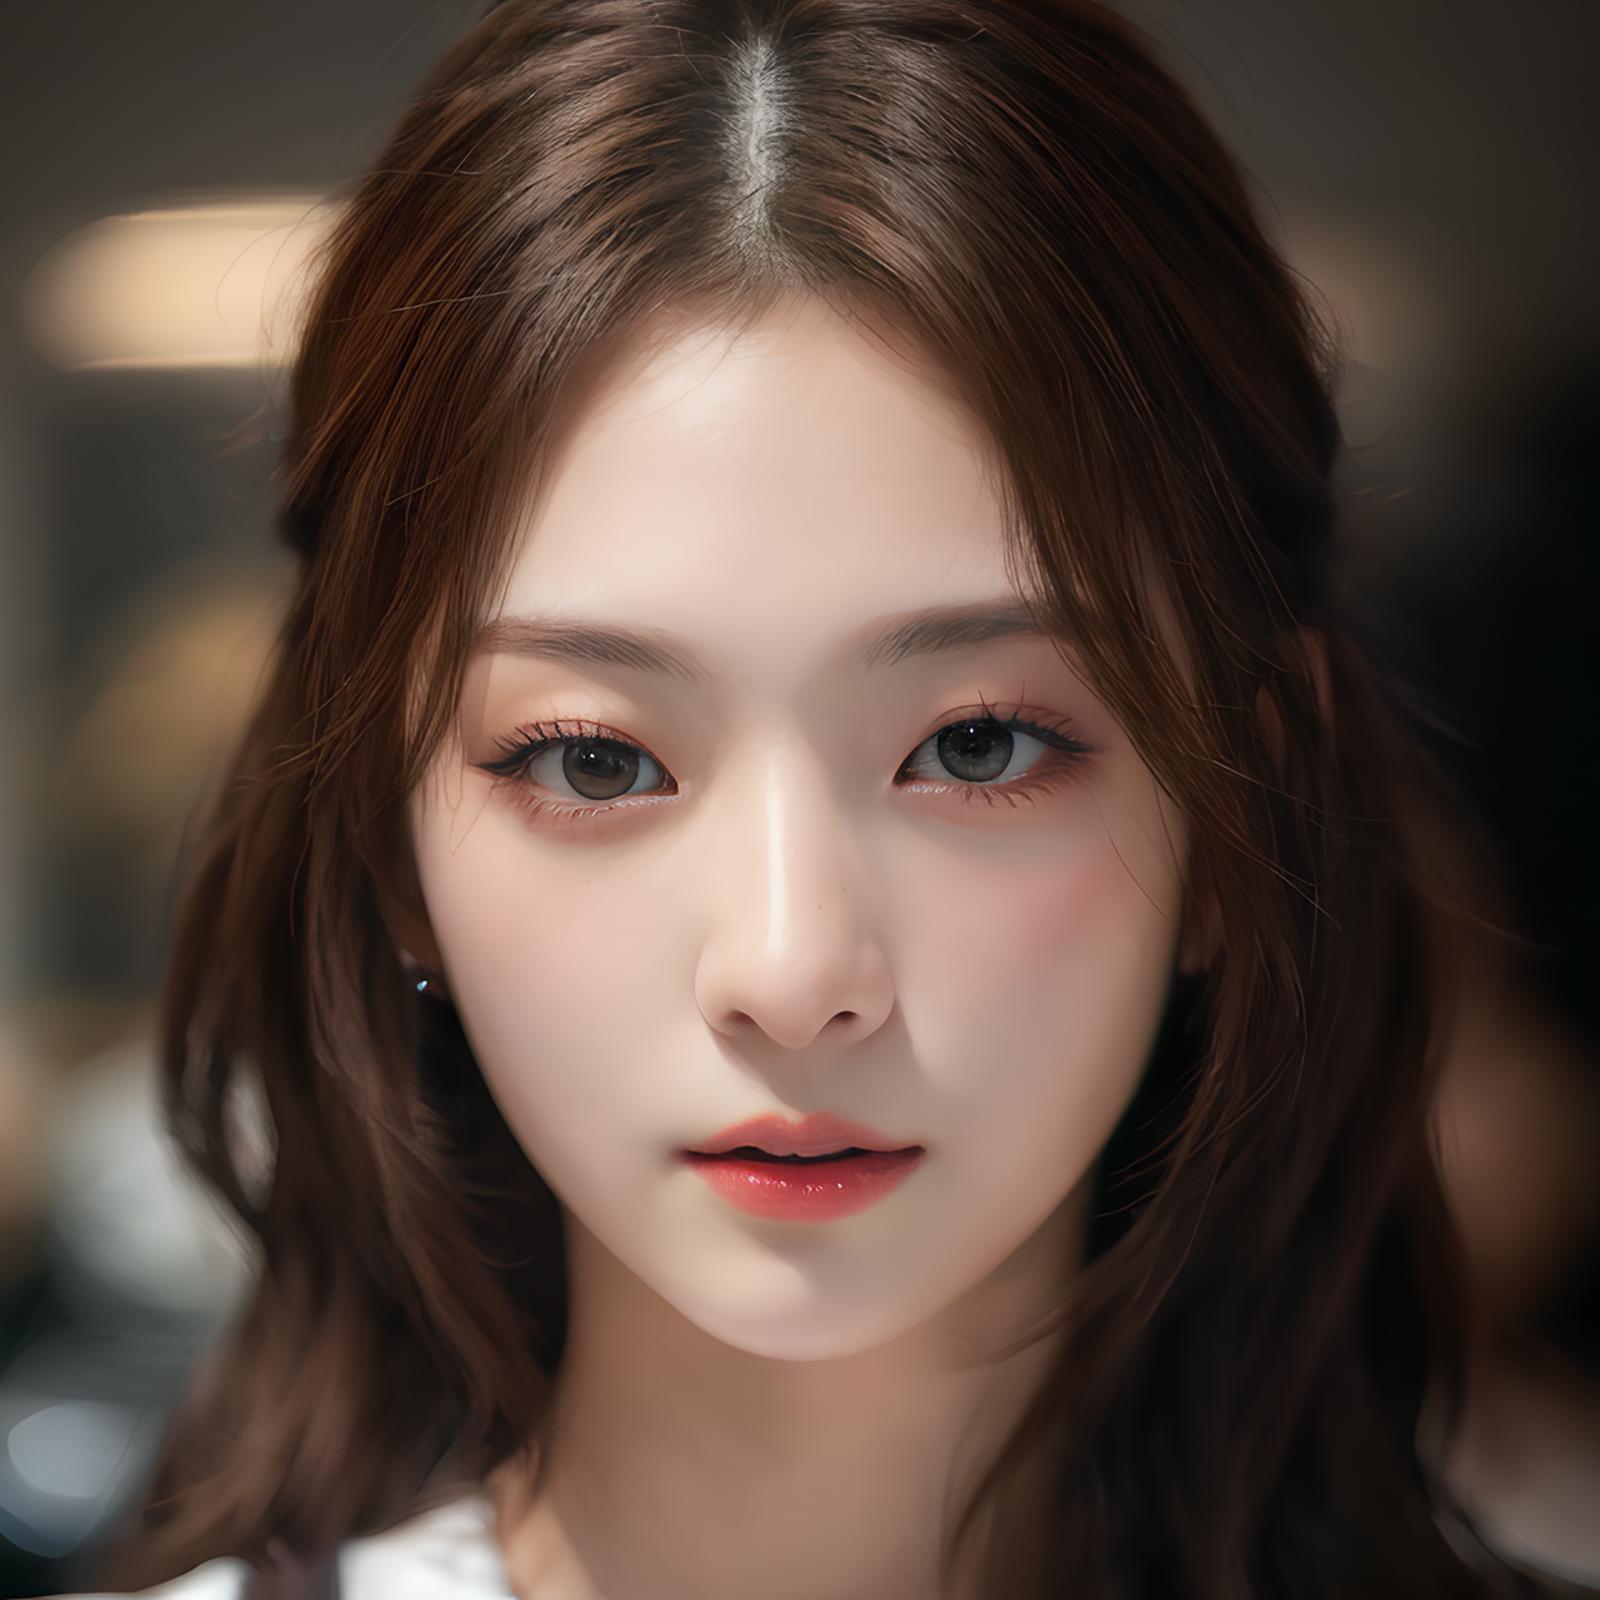 Not Fromis_9 - Nagyung image by Tissue_AI